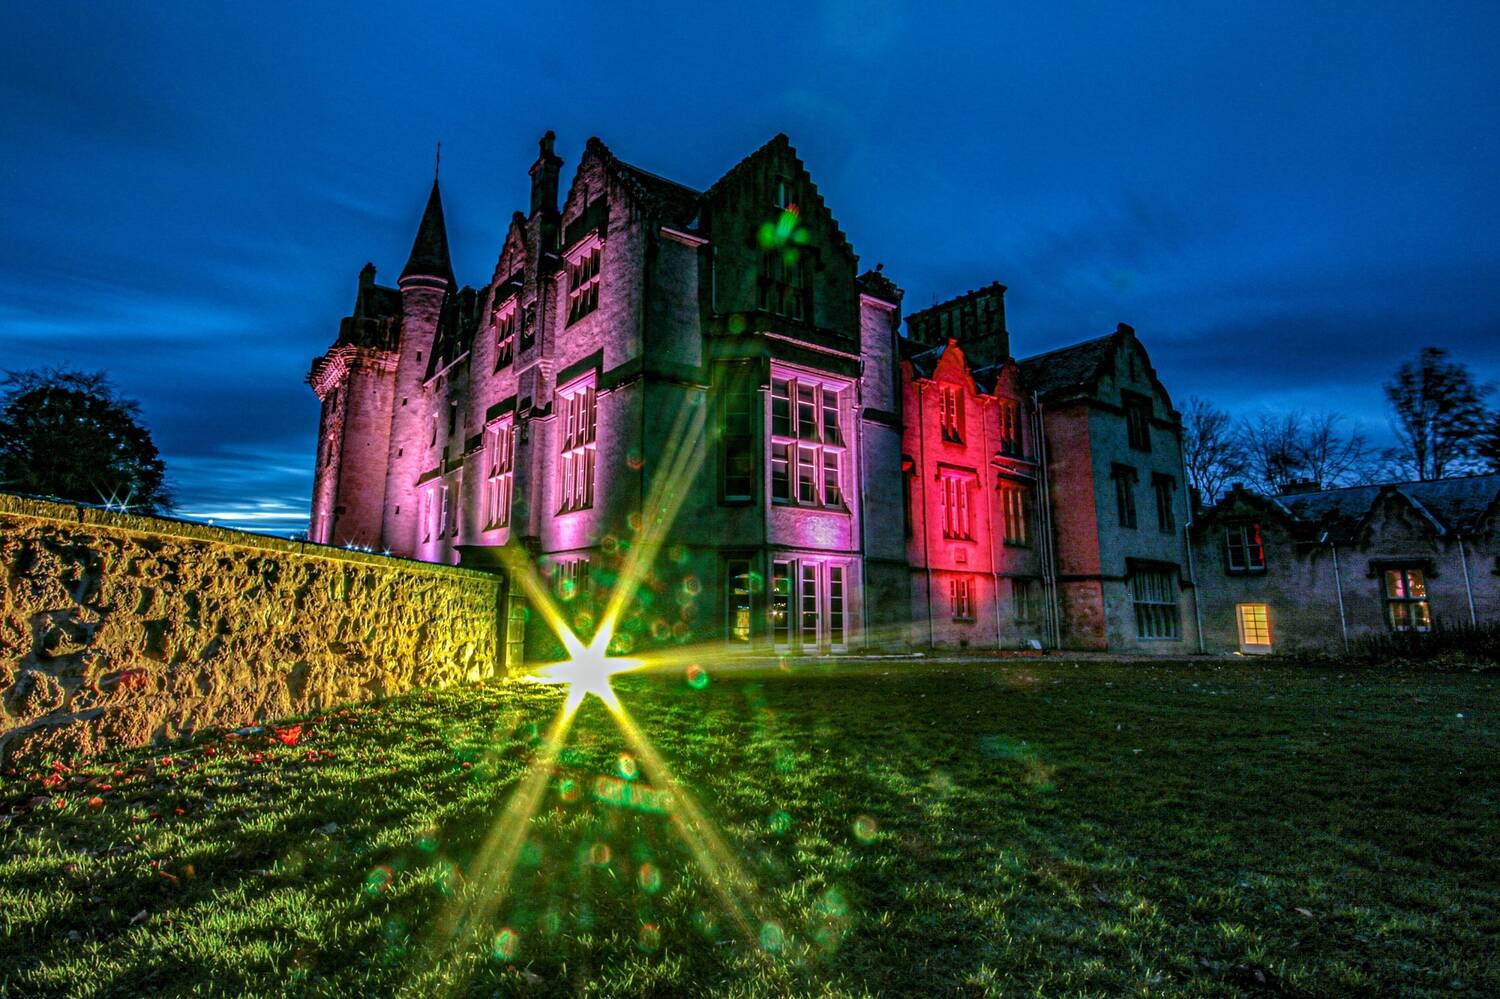 A castle is lit up with multi-coloured lights at night time. A long stone wall and lawn area feature in the foreground.